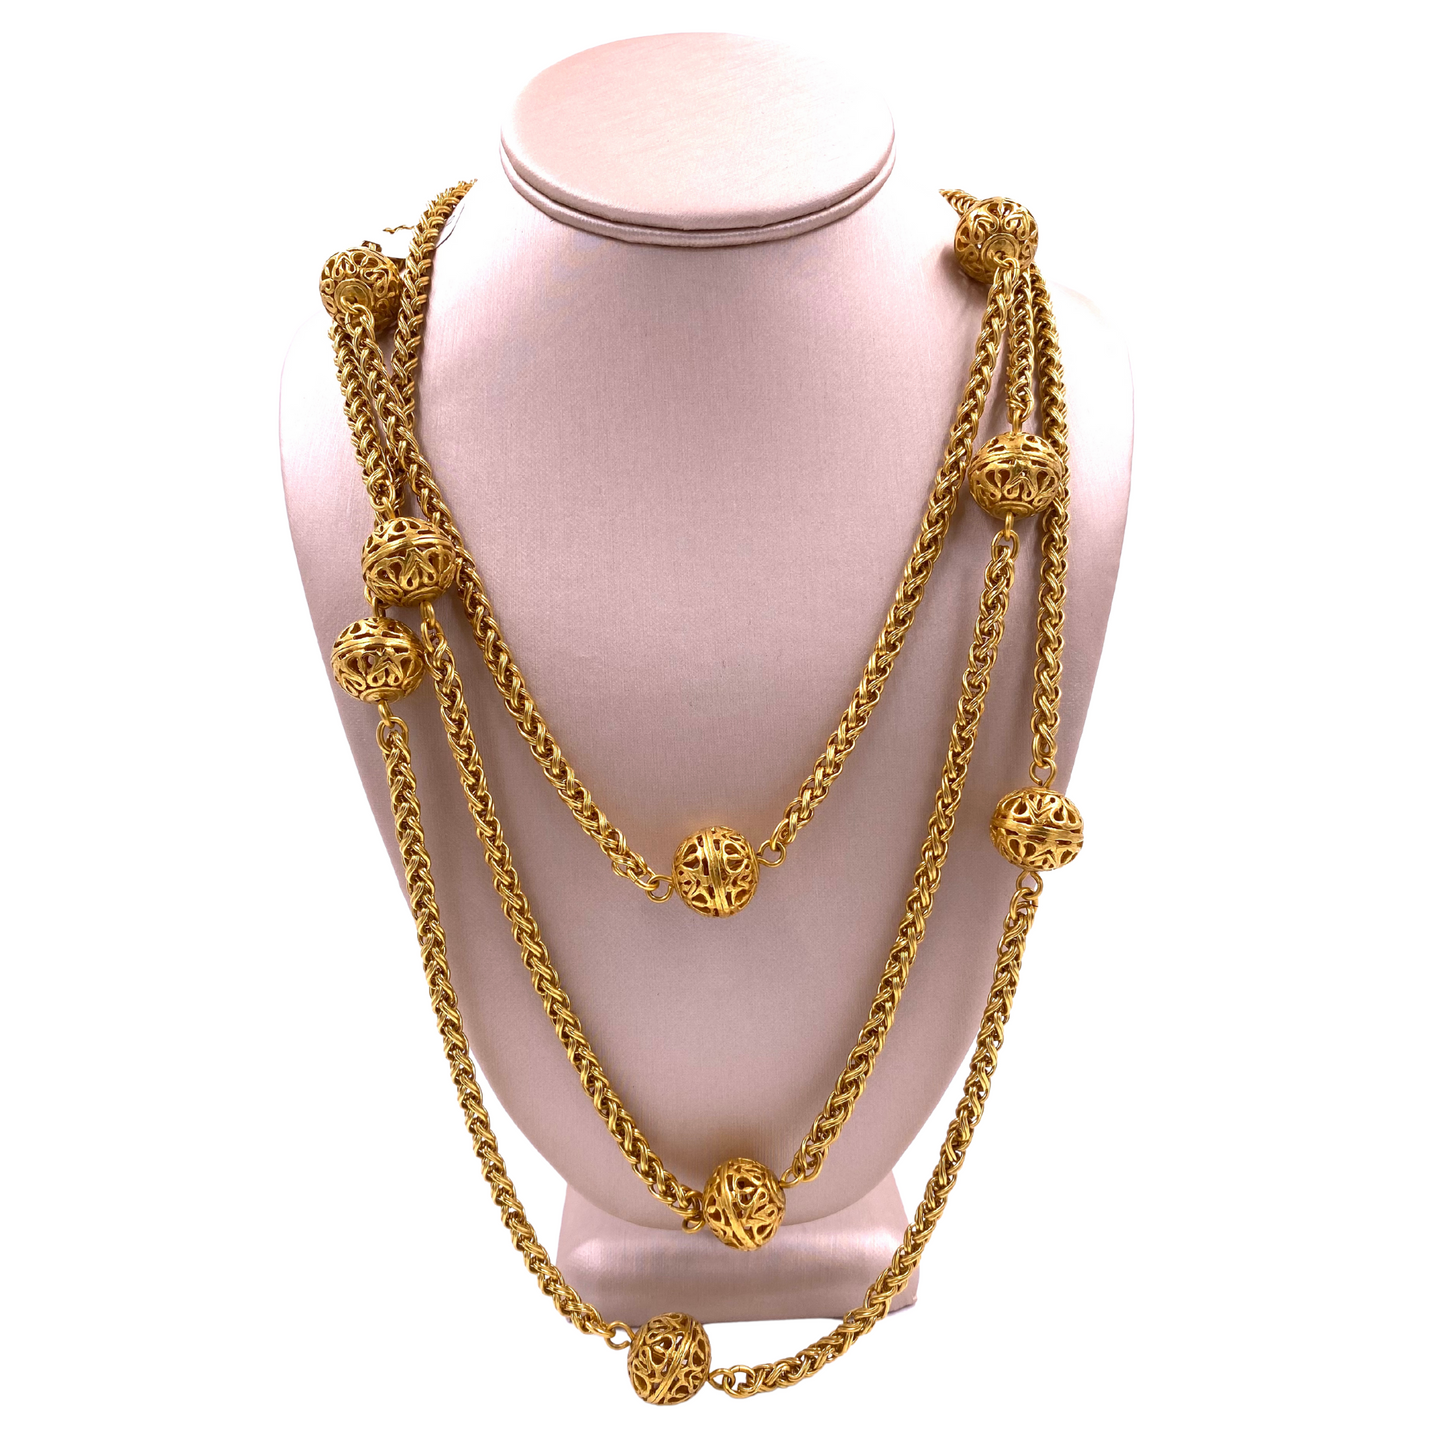 Chanel 1995 Gold Long Chain with Filigree Balls